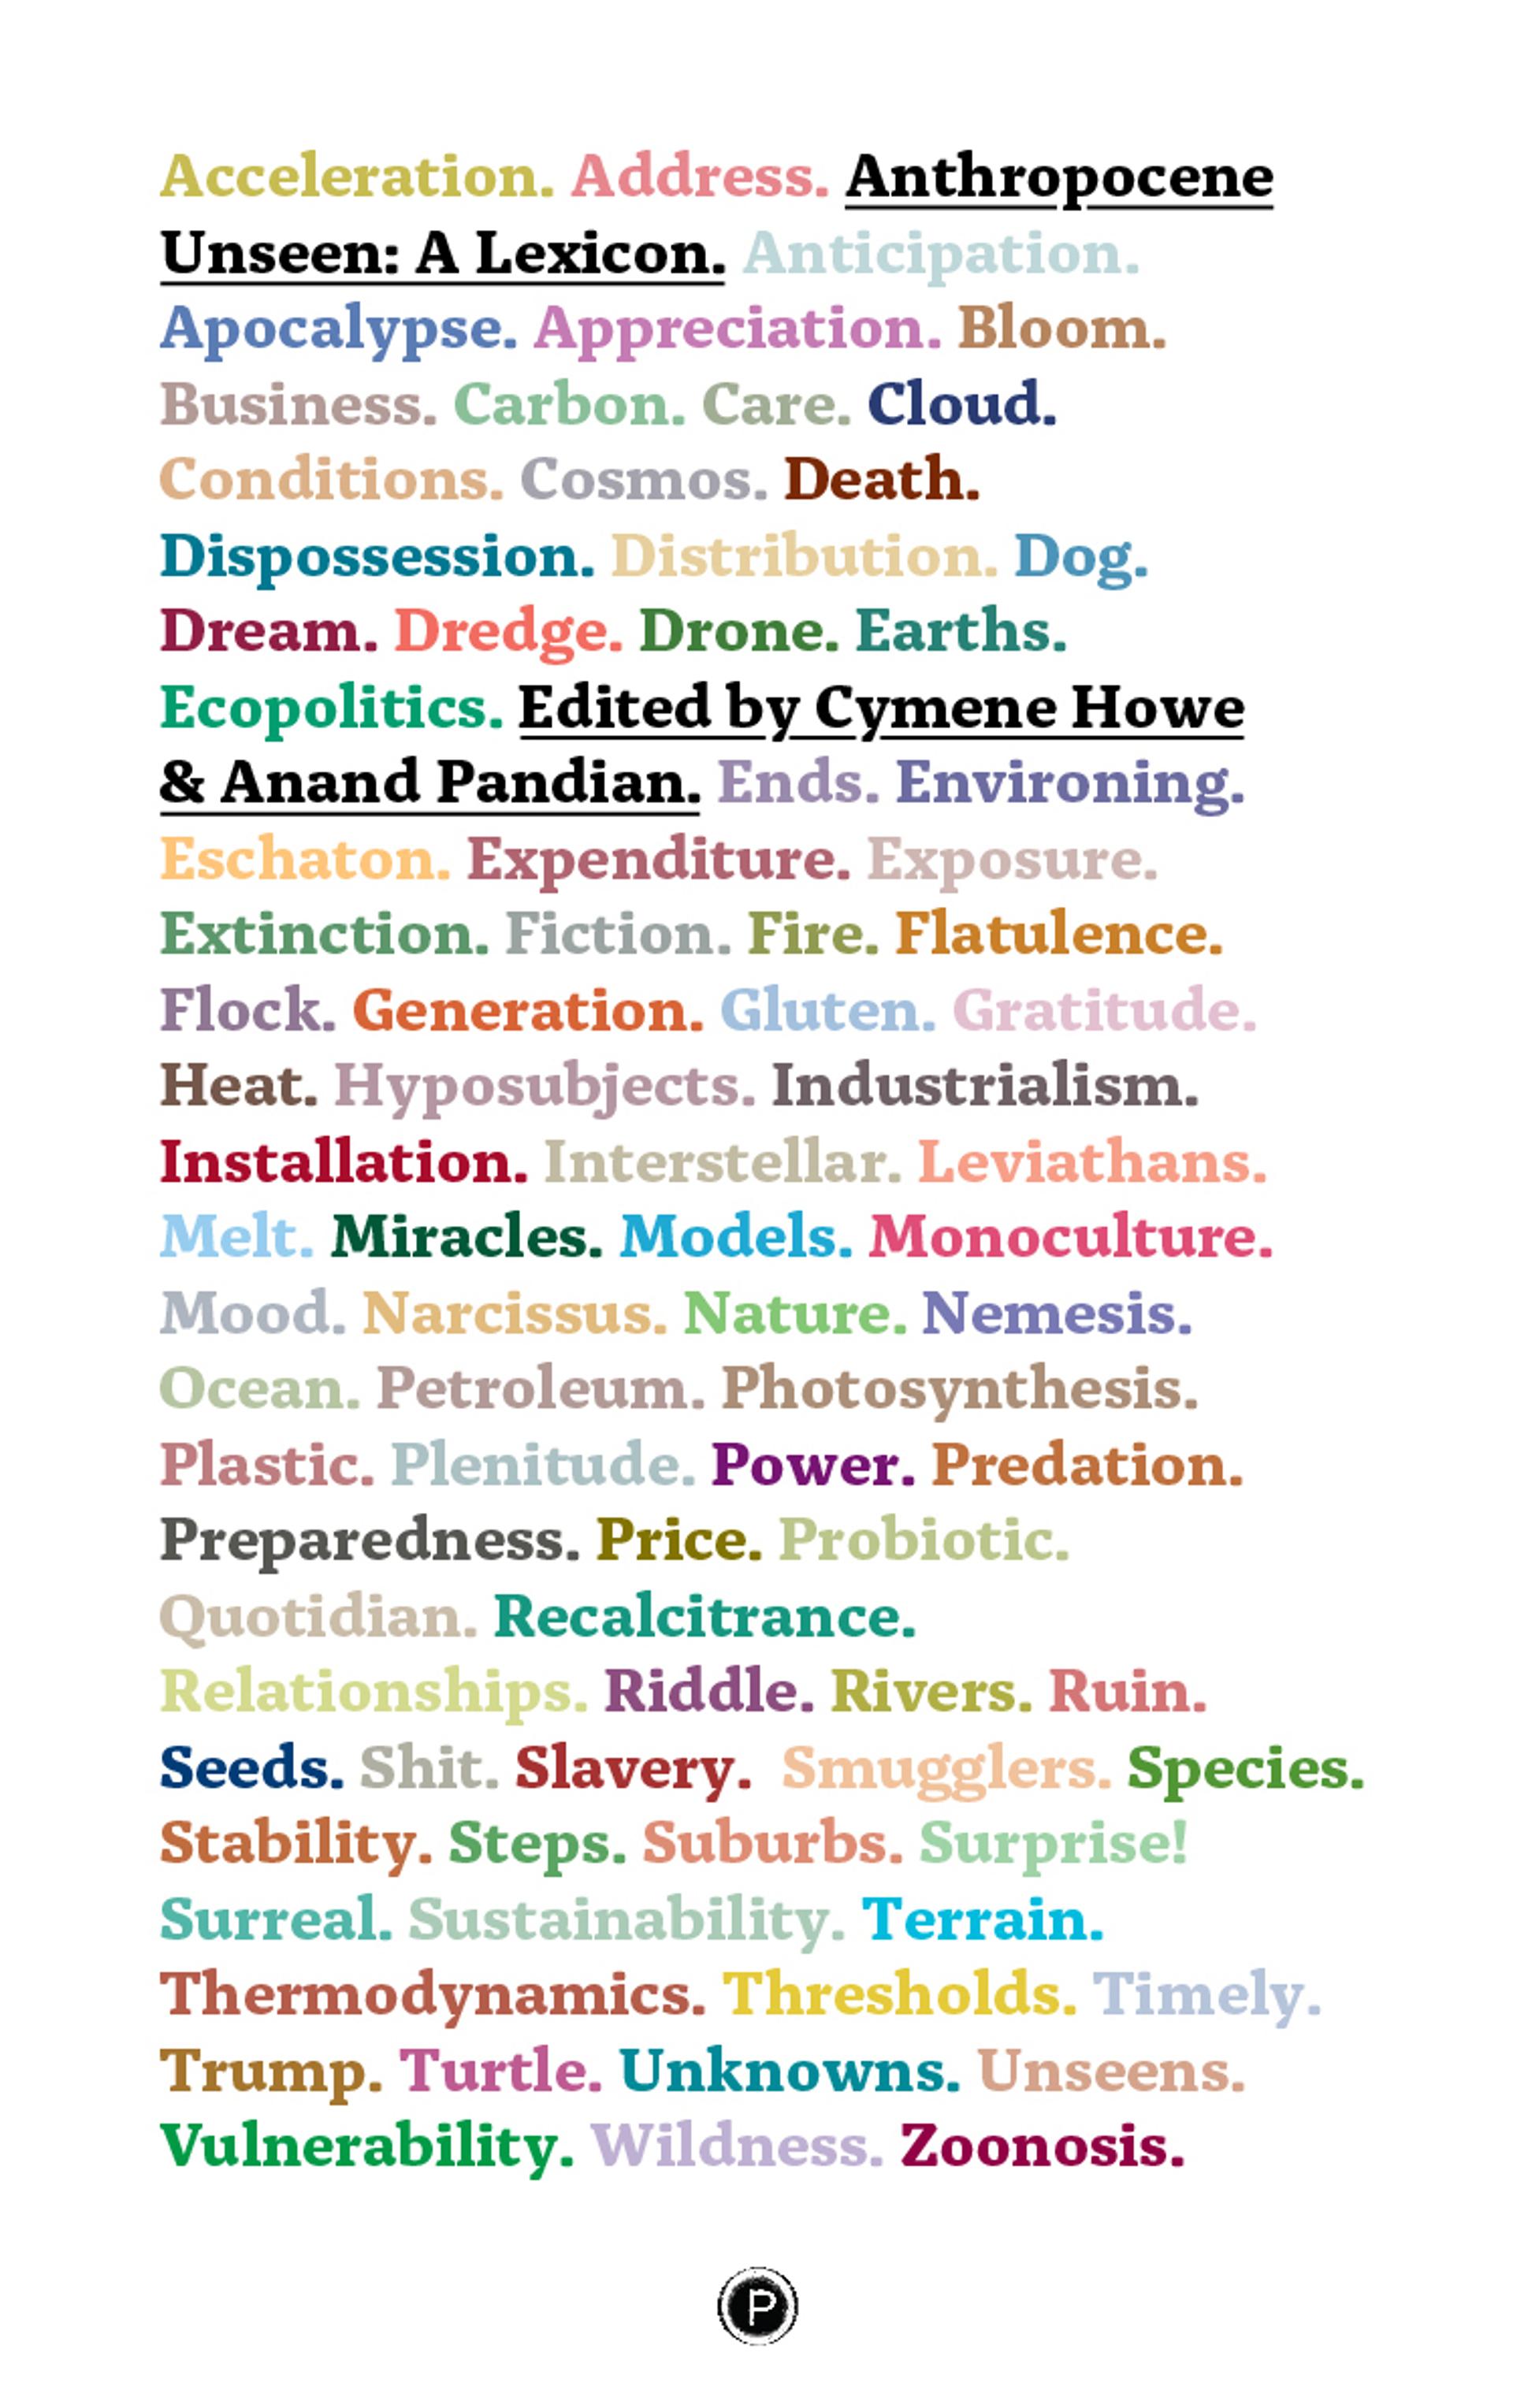 Cover of book titled Anthropocene Unseen: A Lexicon